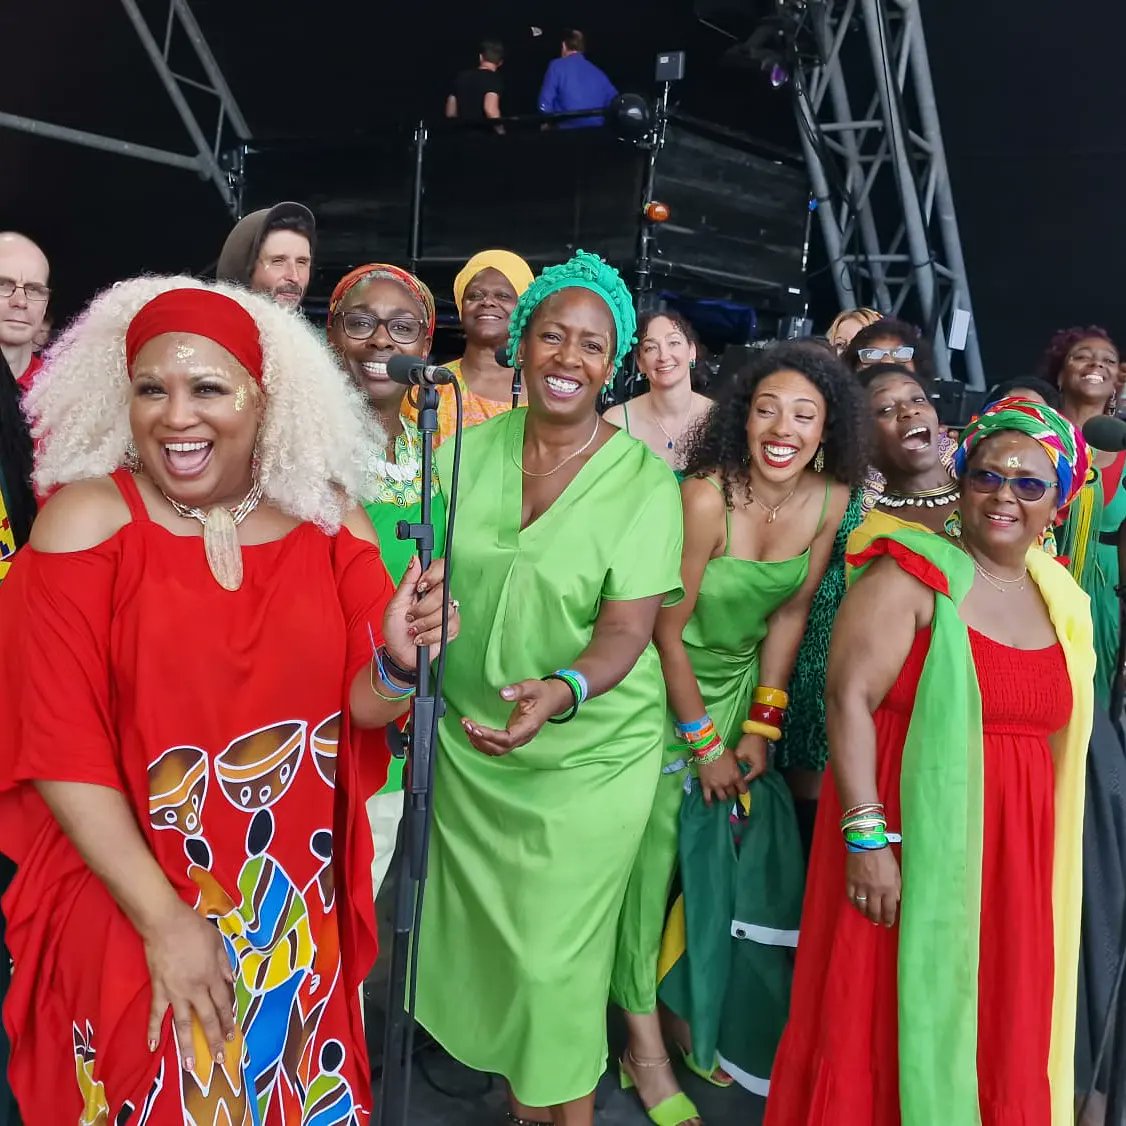 We are still buzzing from our performance on Sunday. We are so proud to be able to represent the Windrush Generation and celebrate the amazing Black British contribution to our country Head to 2hrs15mins at this link bbc.co.uk/iplayer/episod… to see what the BBC broadcast about us